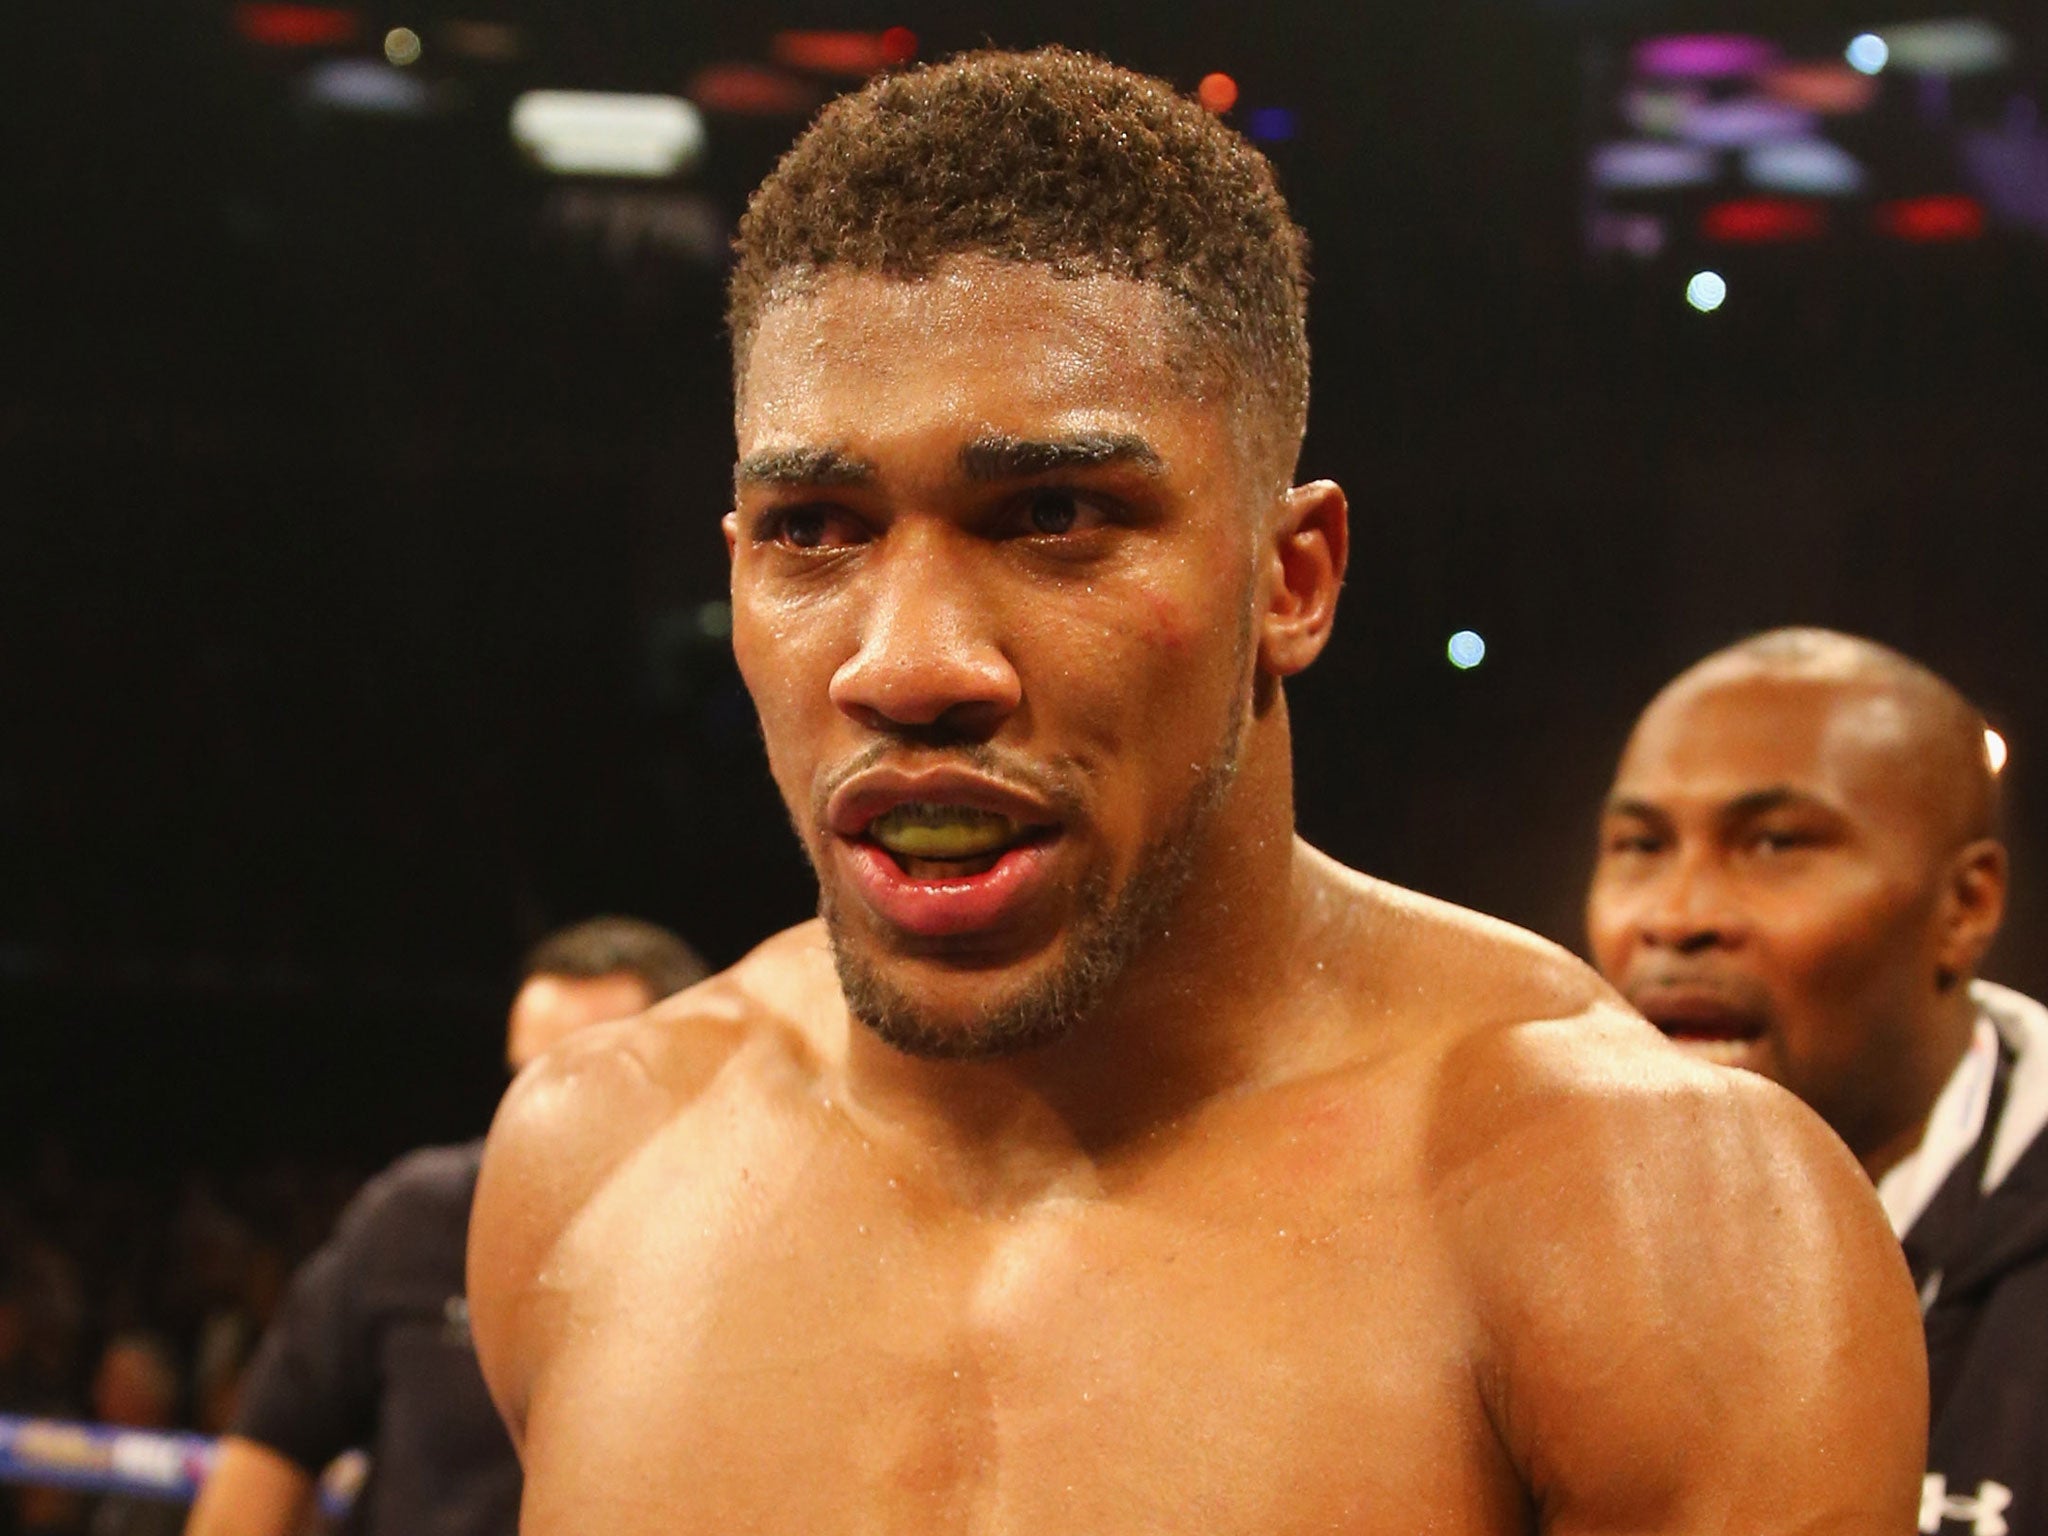 Anthony Joshua, pictured, will fight Charles Martin for the IBF world heavyweight title